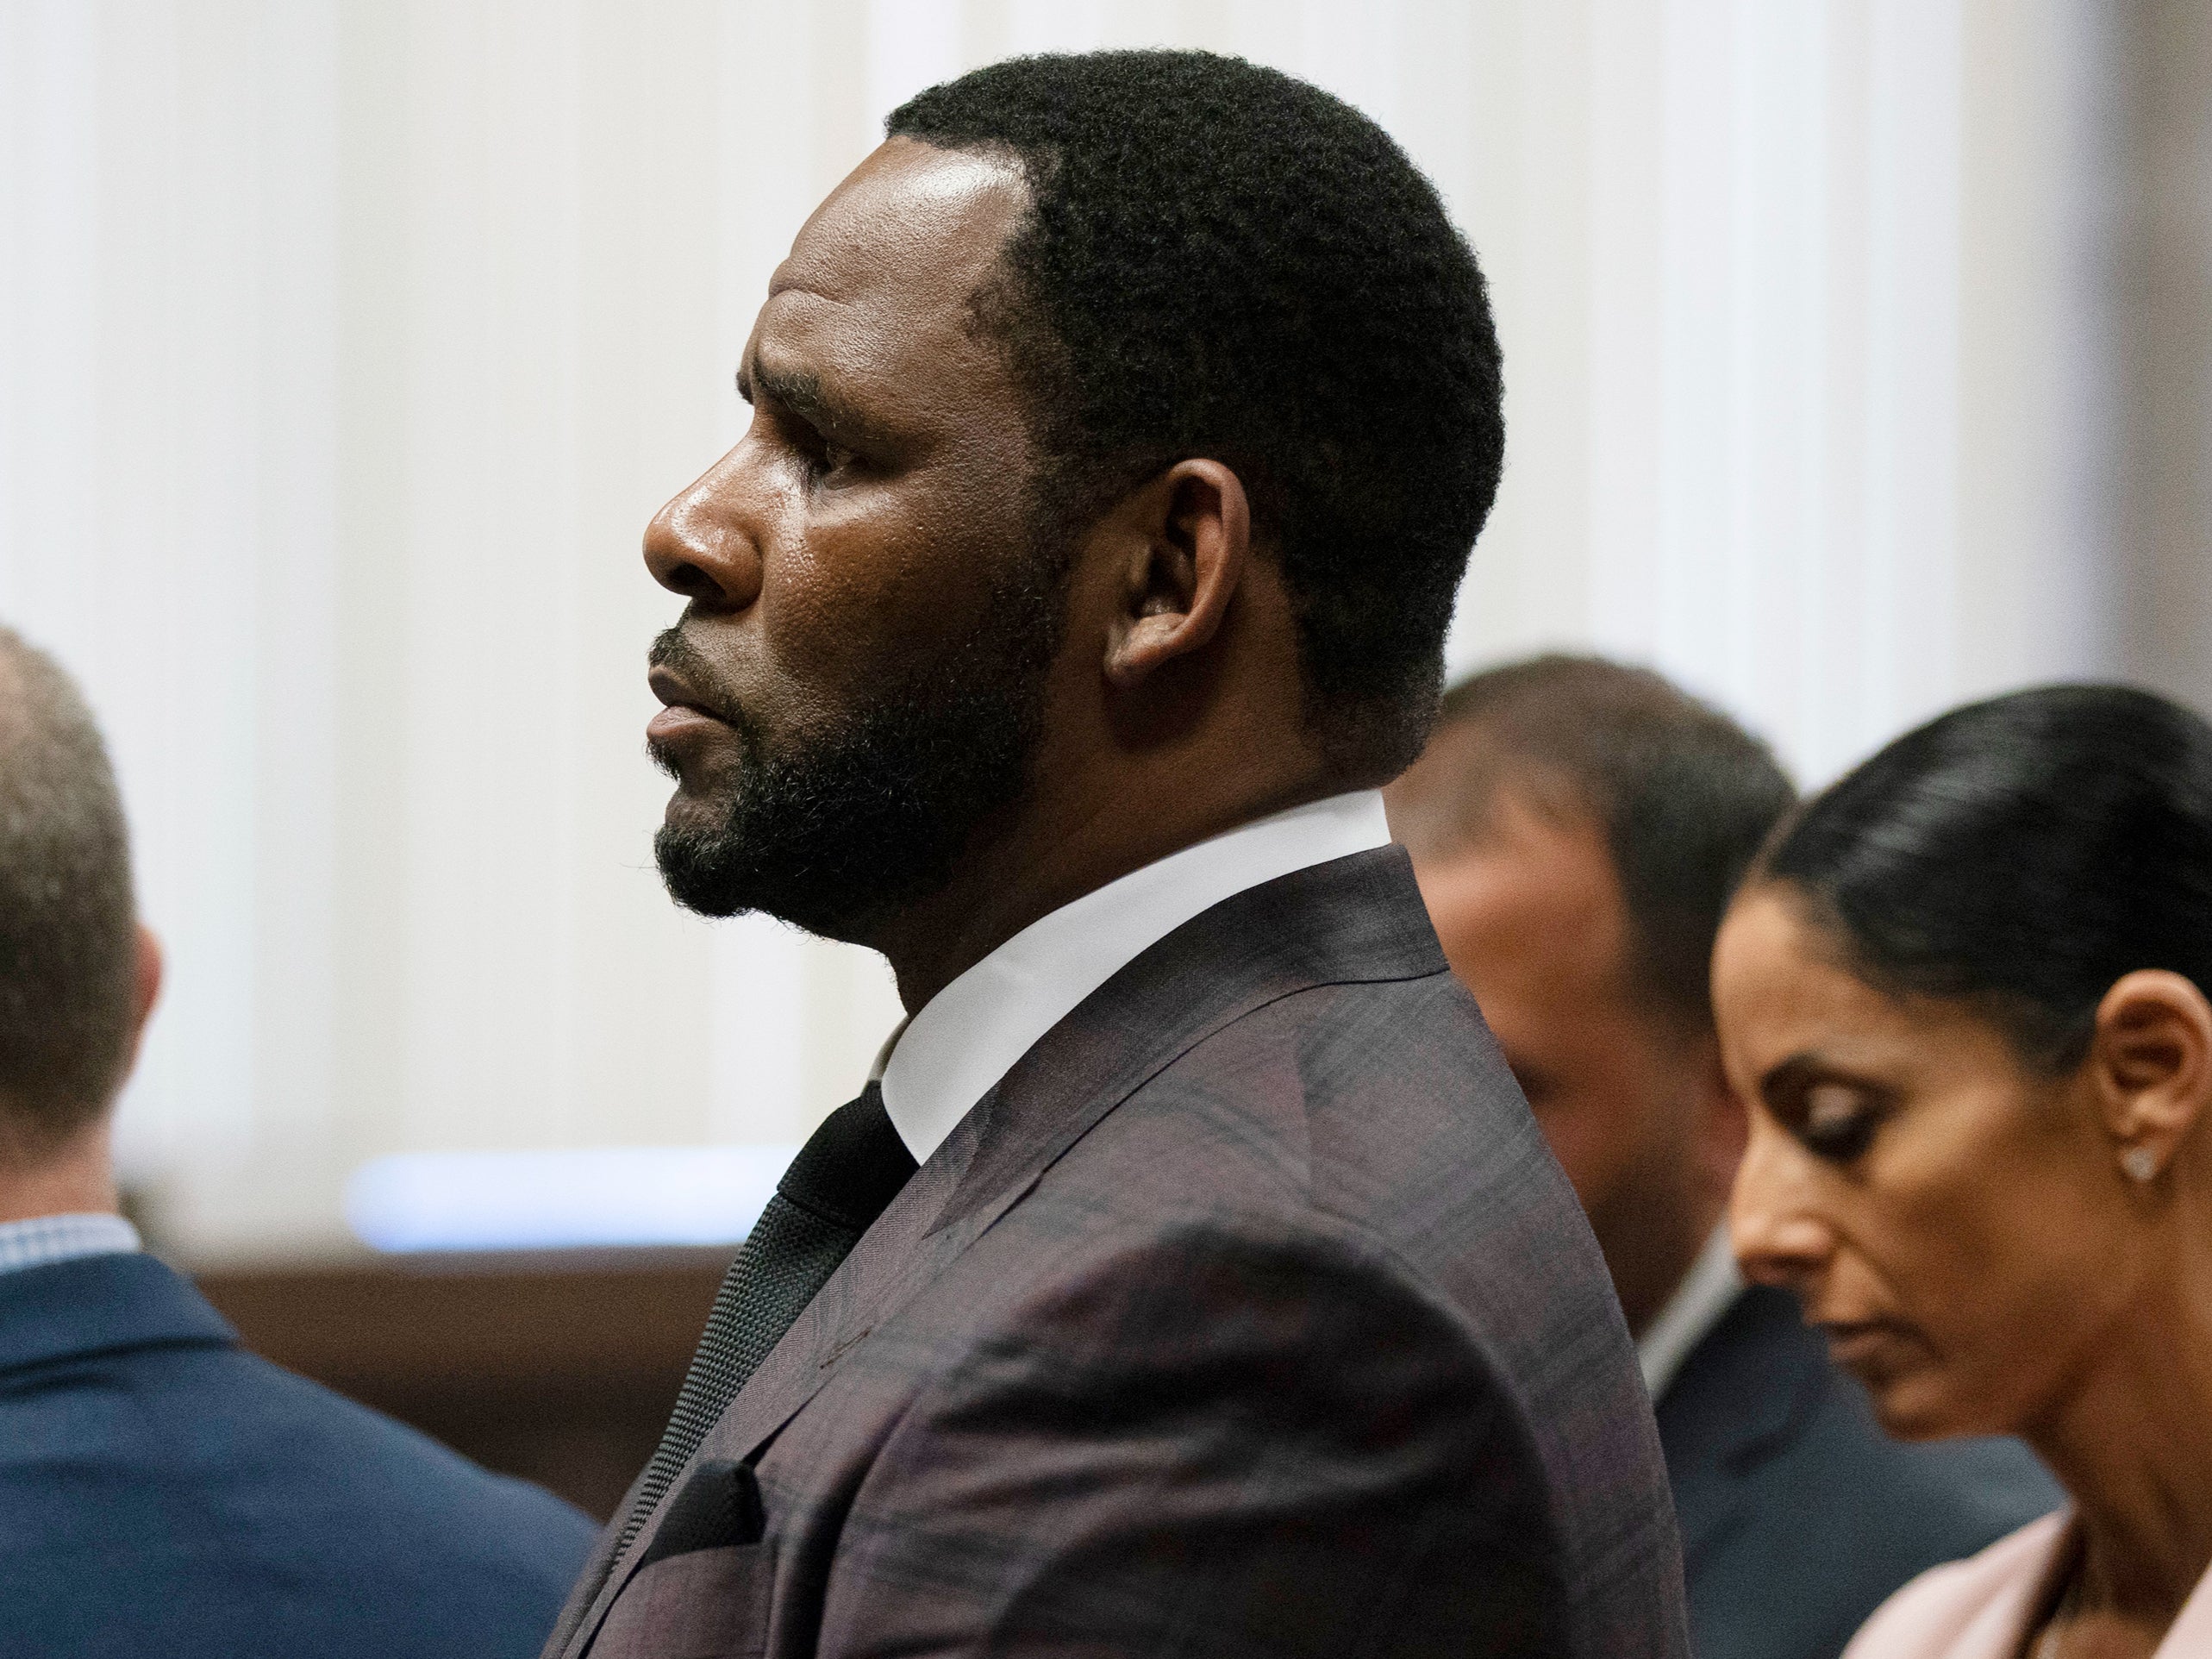 R Kelly (centre) appears at a court hearing on 26 June 2019 in Chicago, Illinois